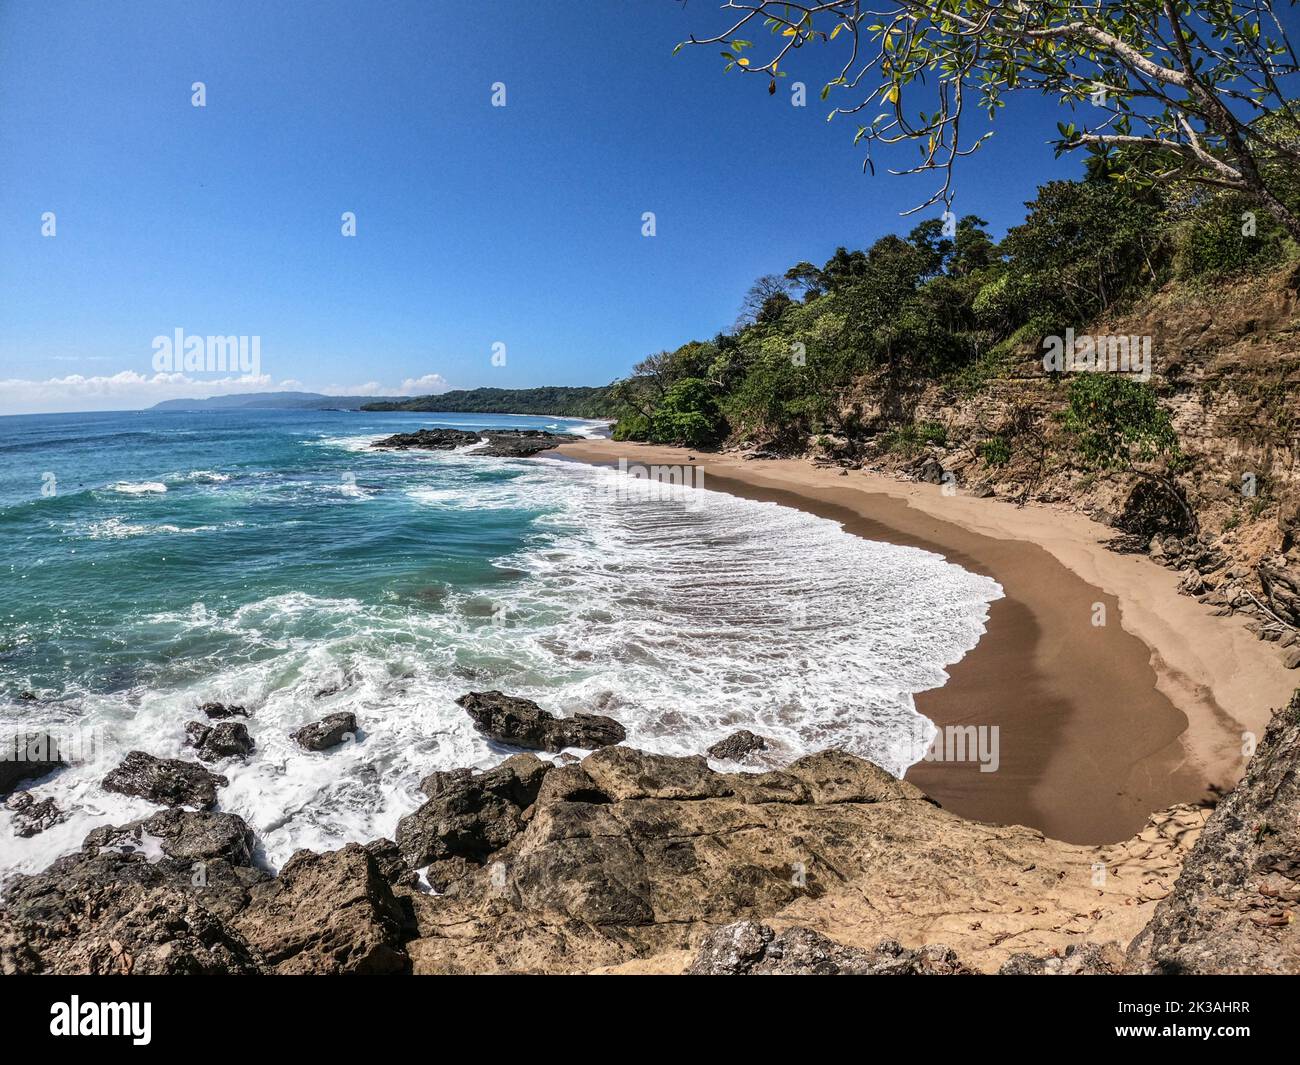 View of untouched Playa Cocalito Beach, Puntarenas, Costa Rica Stock Photo